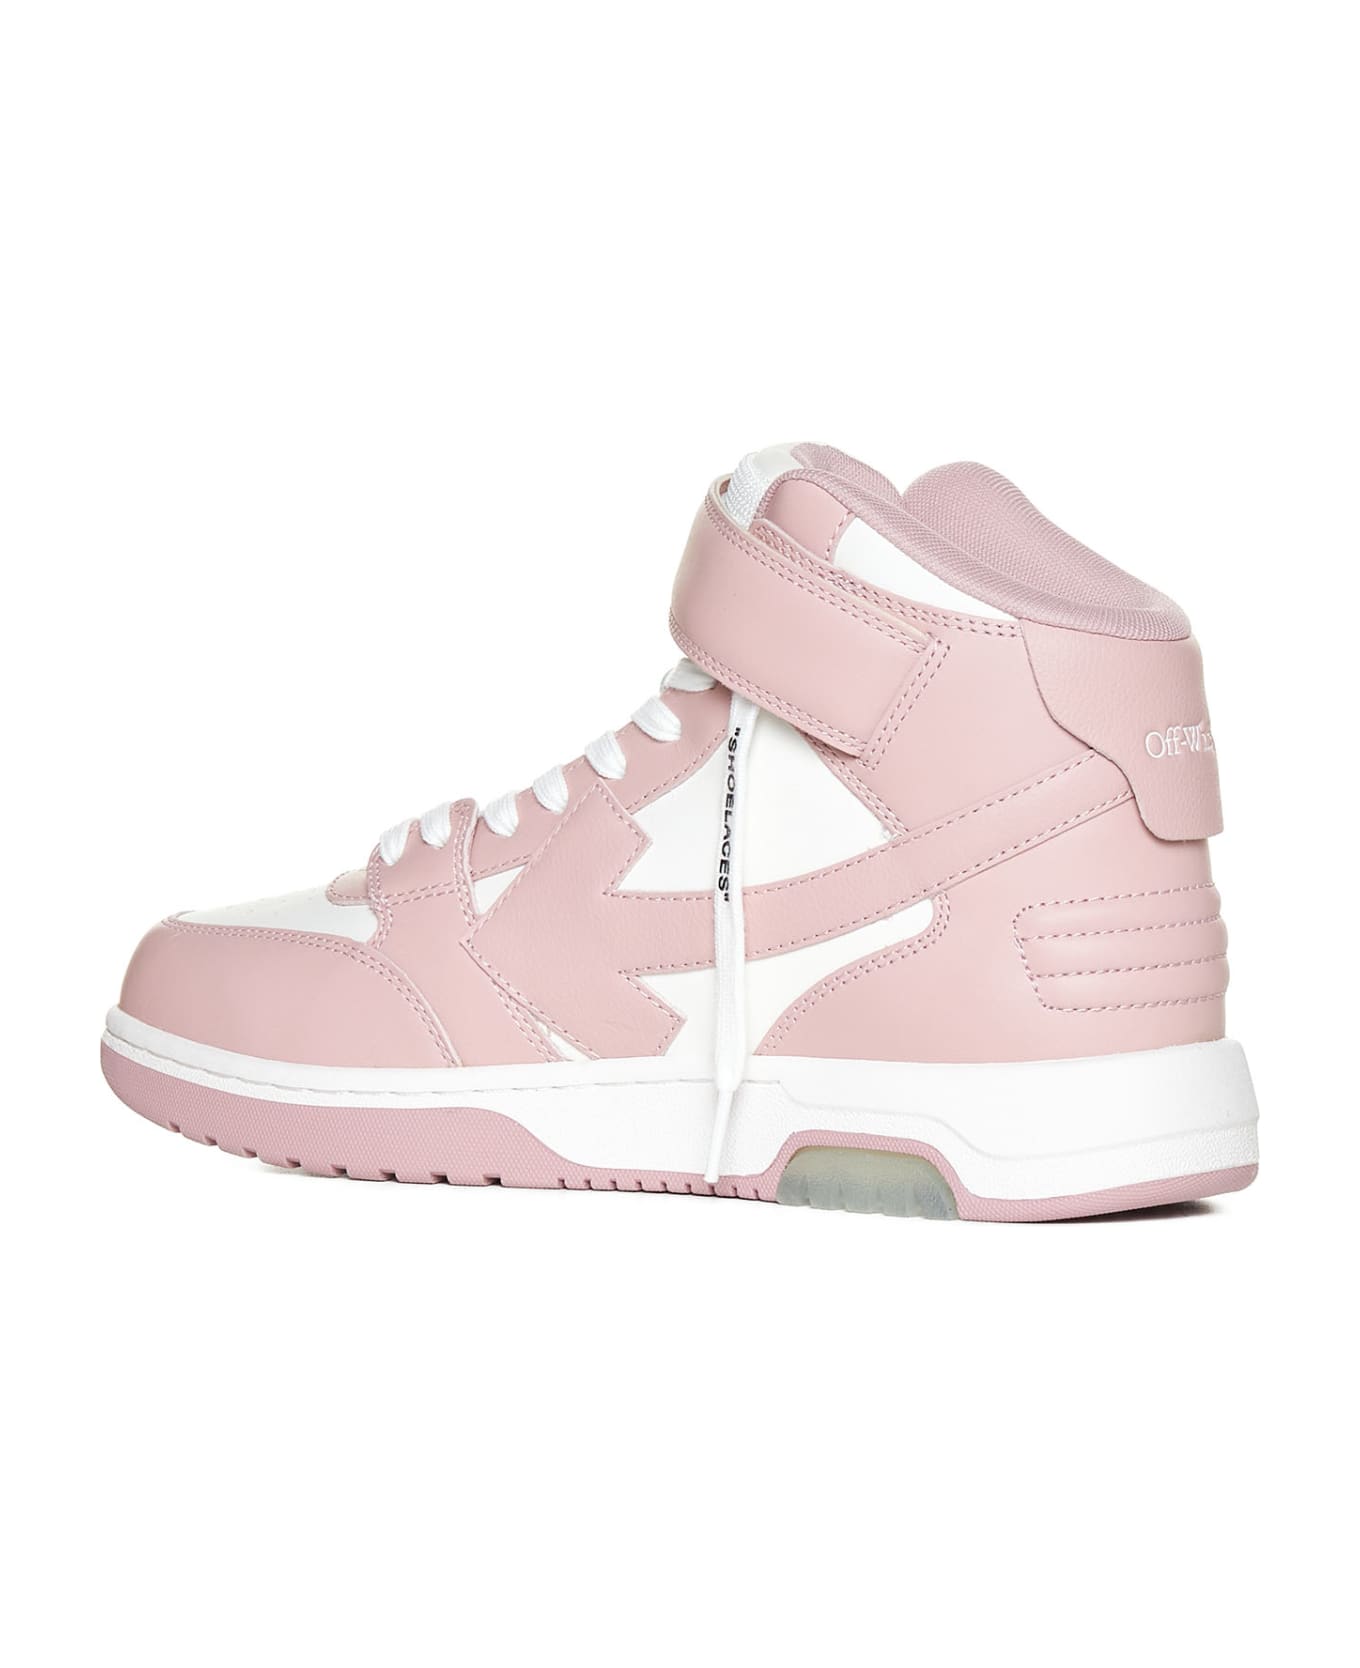 Off-White Out Of Office Mid Sneakers - White pink スニーカー